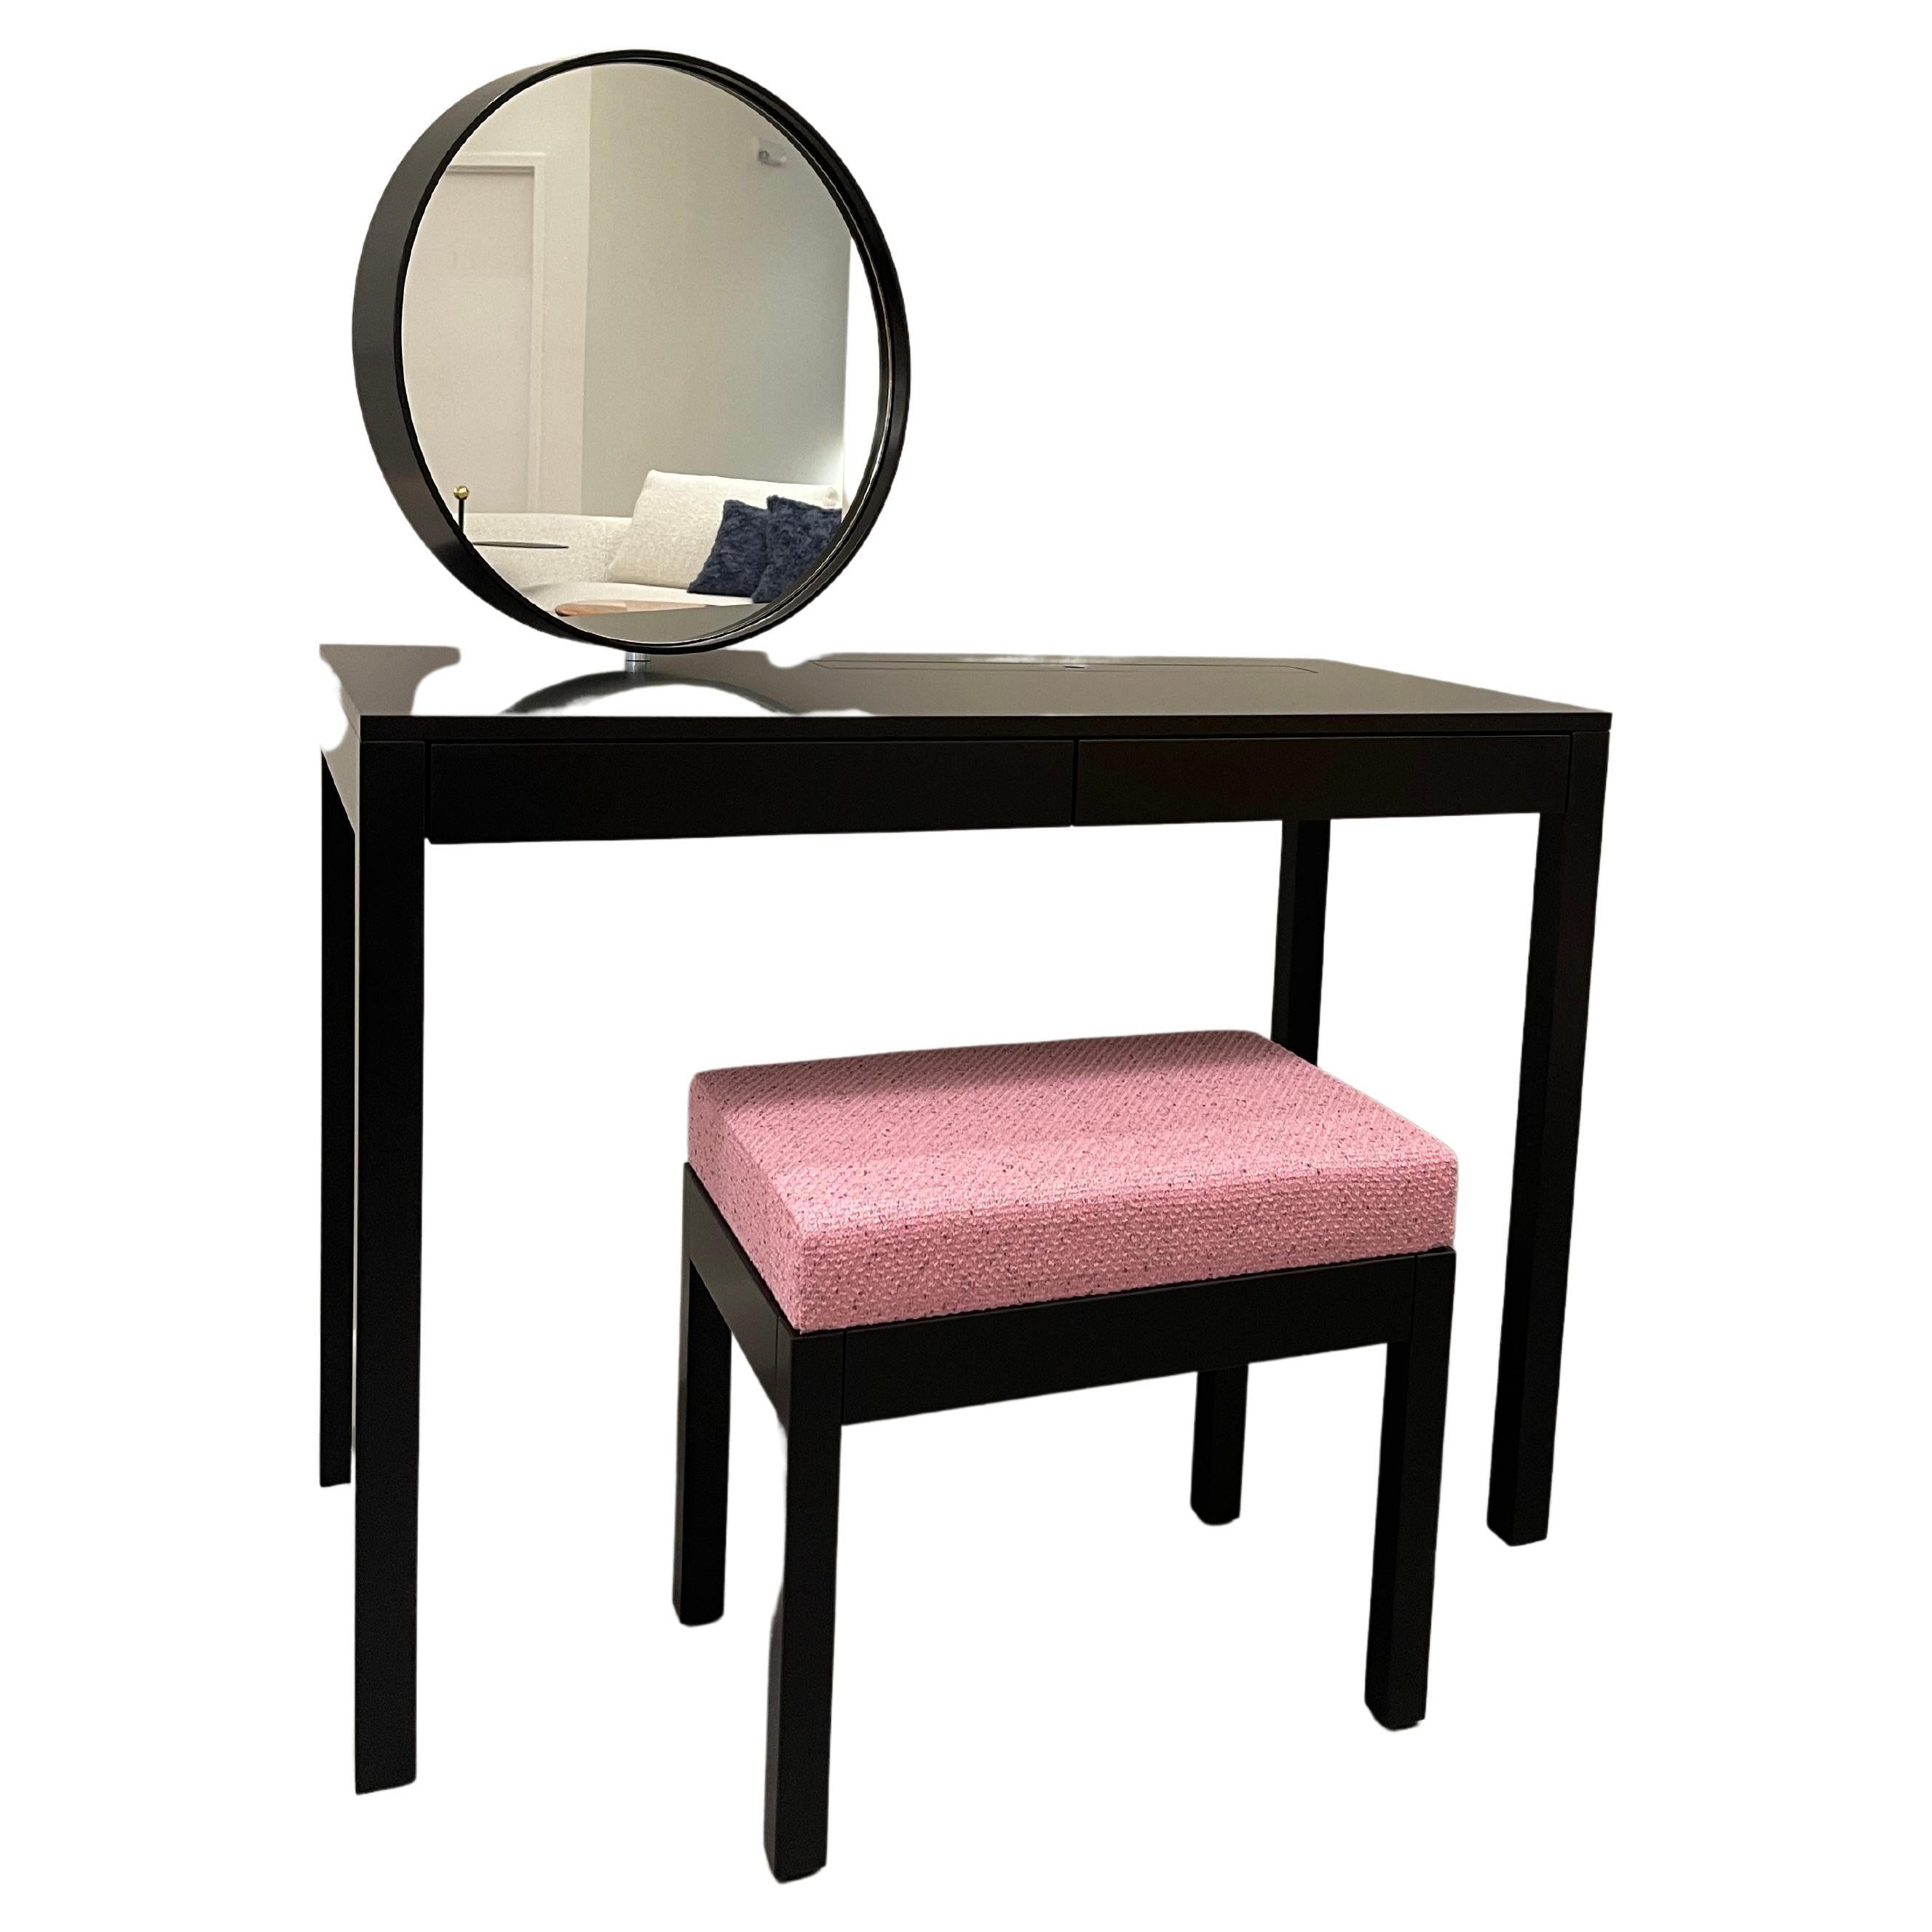 Make-up table with mirror
pivoting and tilting mirror (Ø 50 cm)
2 drawers (W 41.5 x H 4.5 x D 26.5 cm) compartment (W 49 cm, H 6 cm, D 6 cm) with lid integrated in table top

Stool: 50,0 x 45,0 x 35,0
Special Fabric Kvadrat Raf Simons Pilot